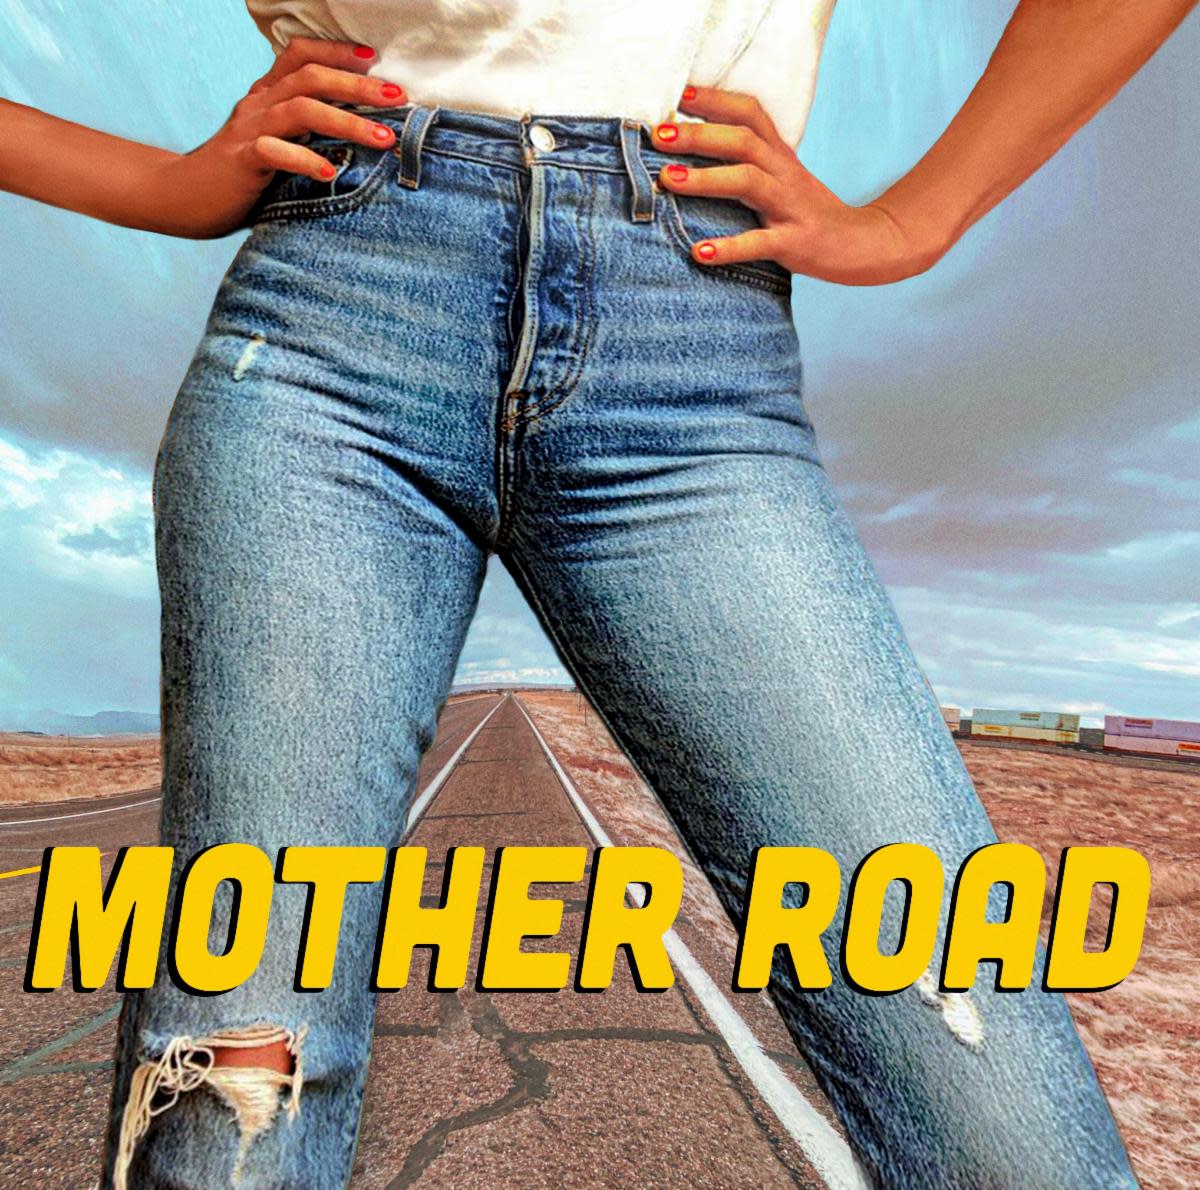 The new Grace Potter album, "Mother Road," came out Aug. 18.